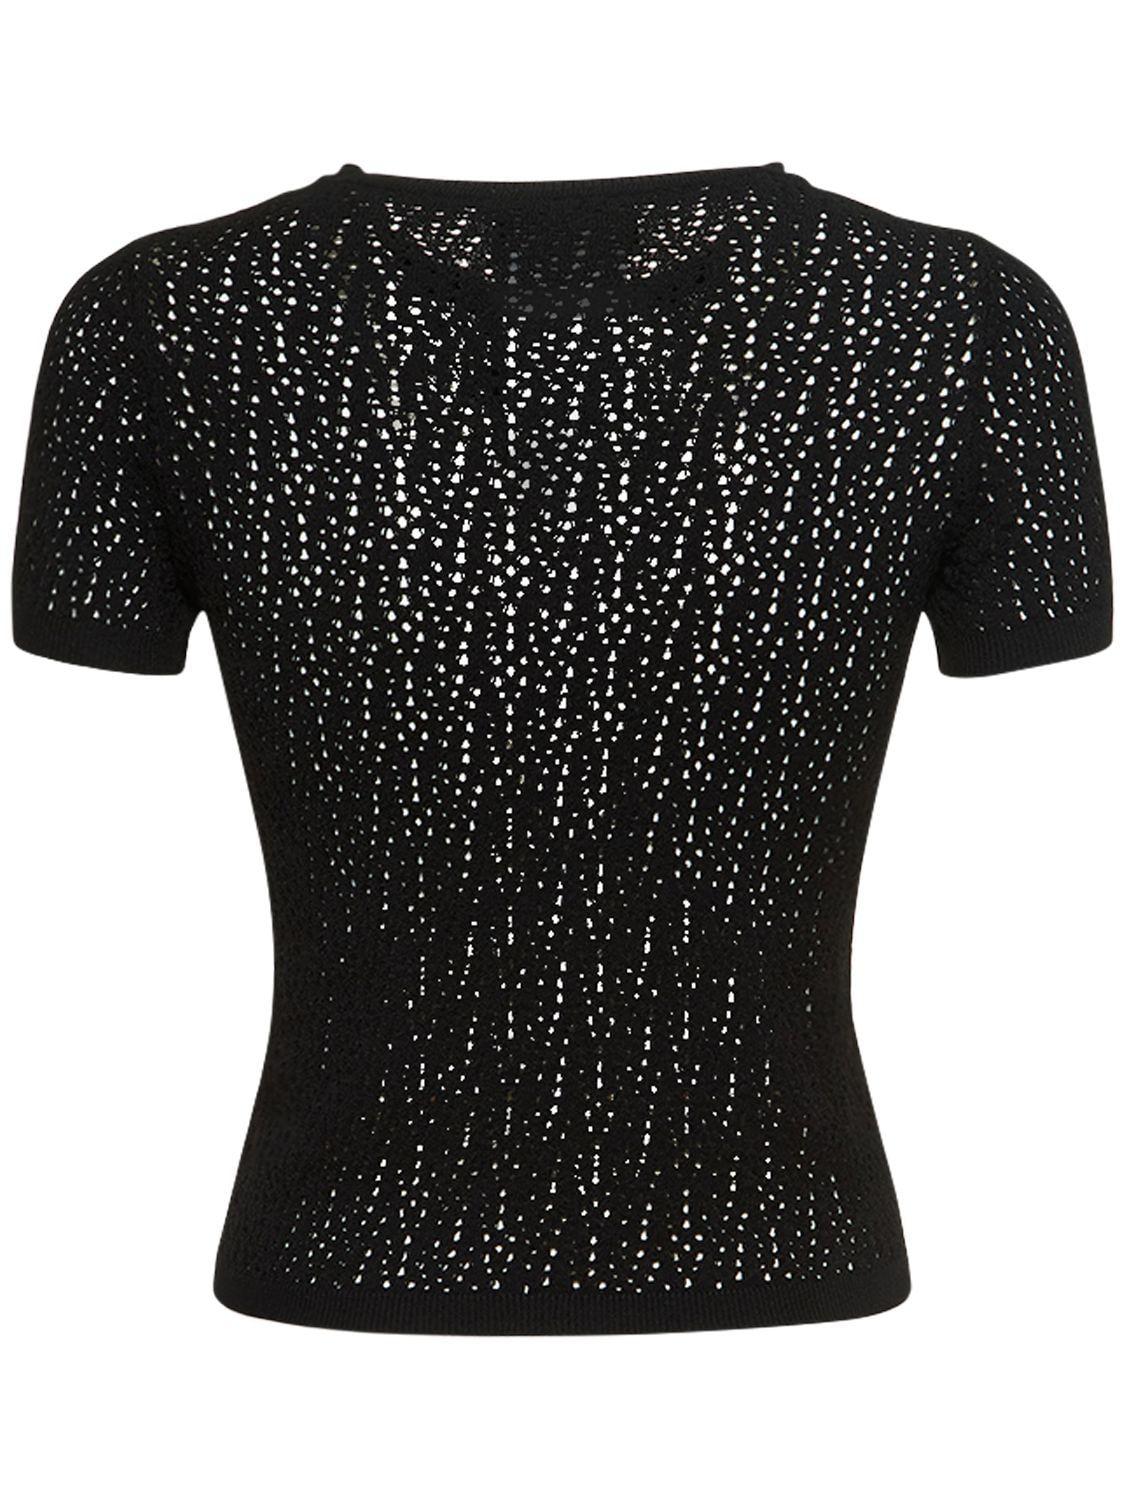 Rochas Perforated Logo Knit Short Sleeve Top in Black | Lyst